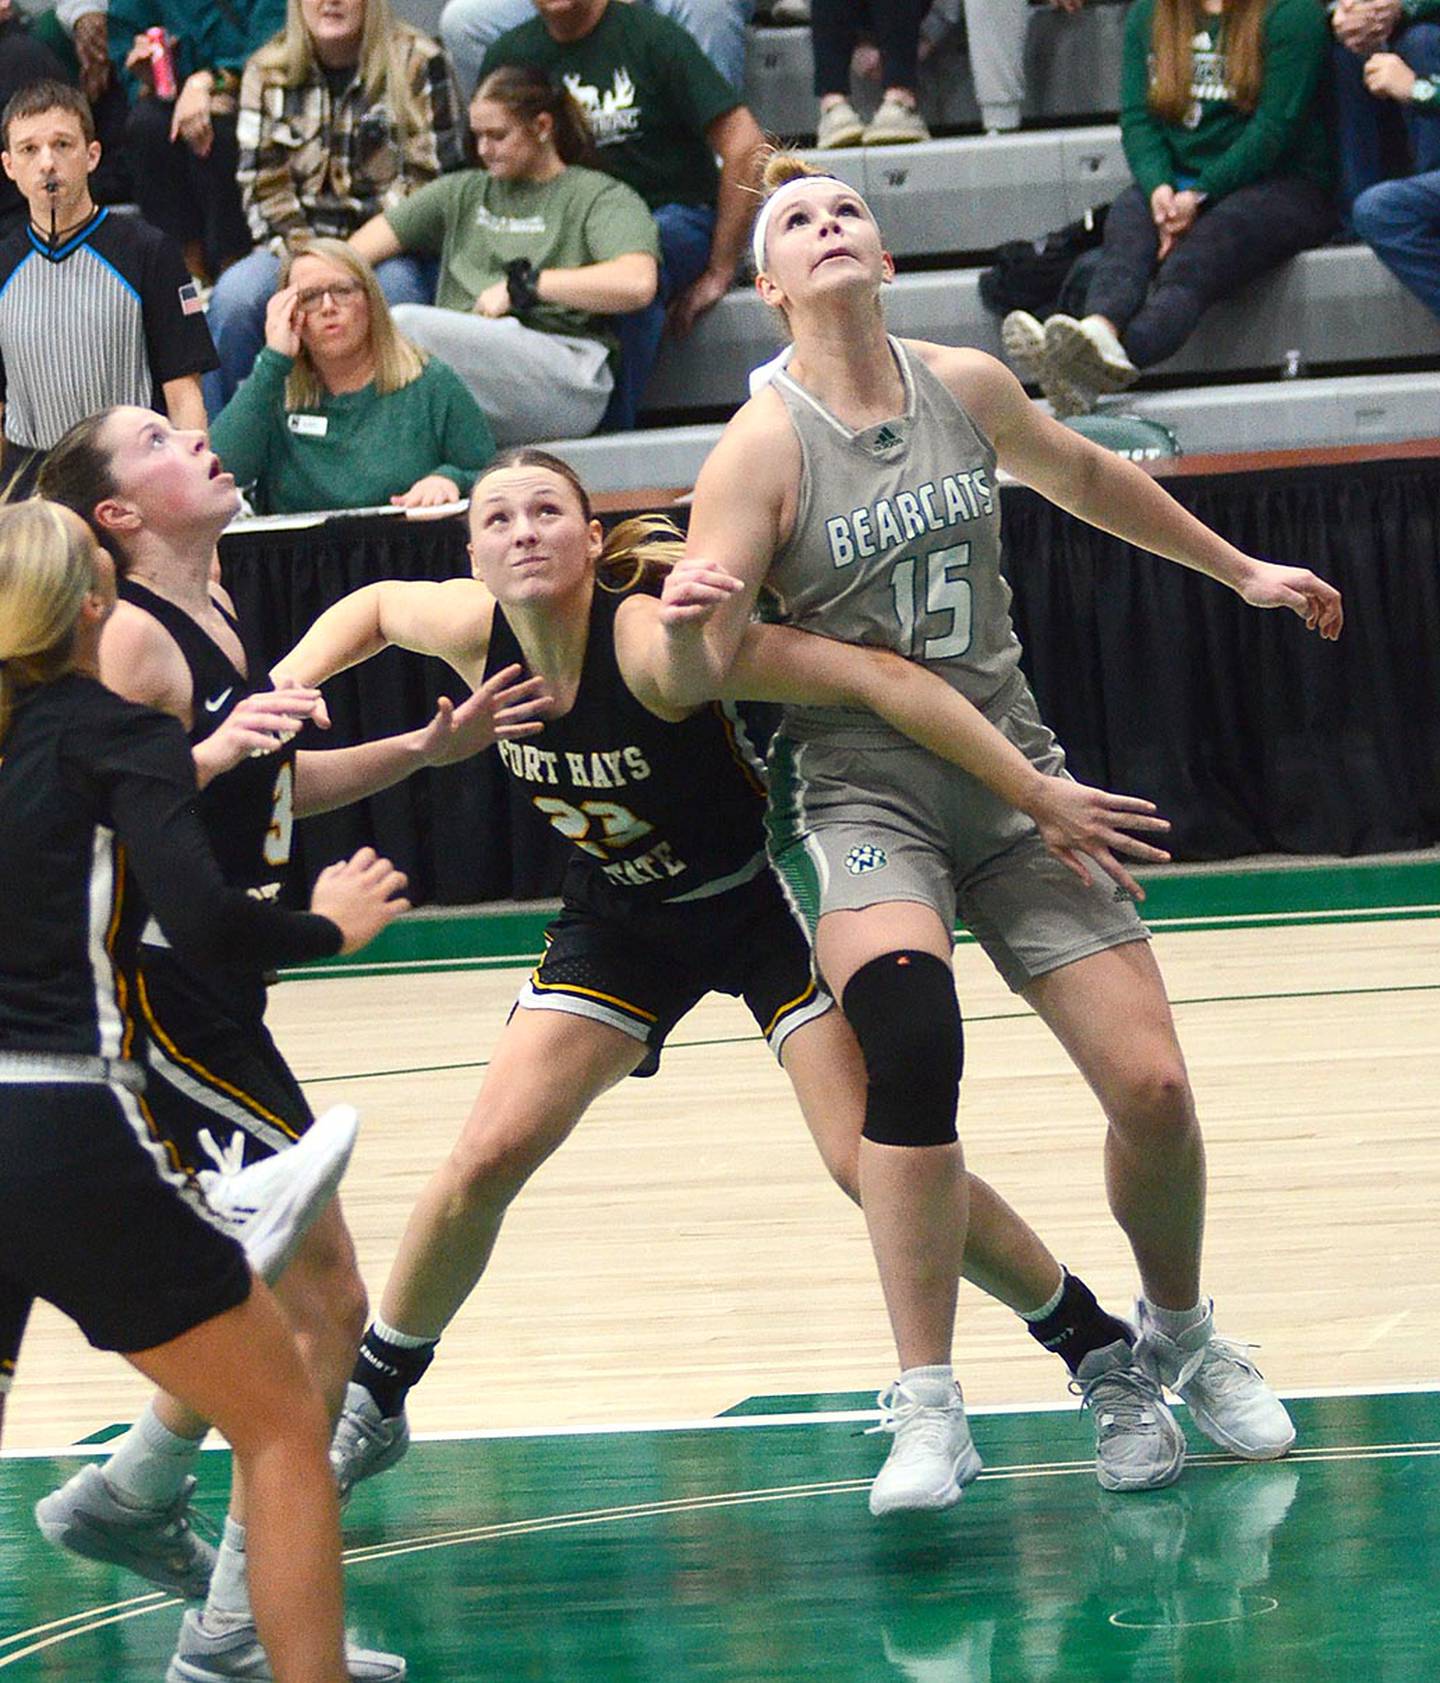 Creston's all-time leading scorer and rebounder, Kelsey Fields (15) battles for rebound position during a Northwest Missouri State home victory over Fort Hays State in February. Fort Hays State later defeated the Bearcats in both the semifinals of the MIAA tournament and the first round of the NCAA Division II national tournament.